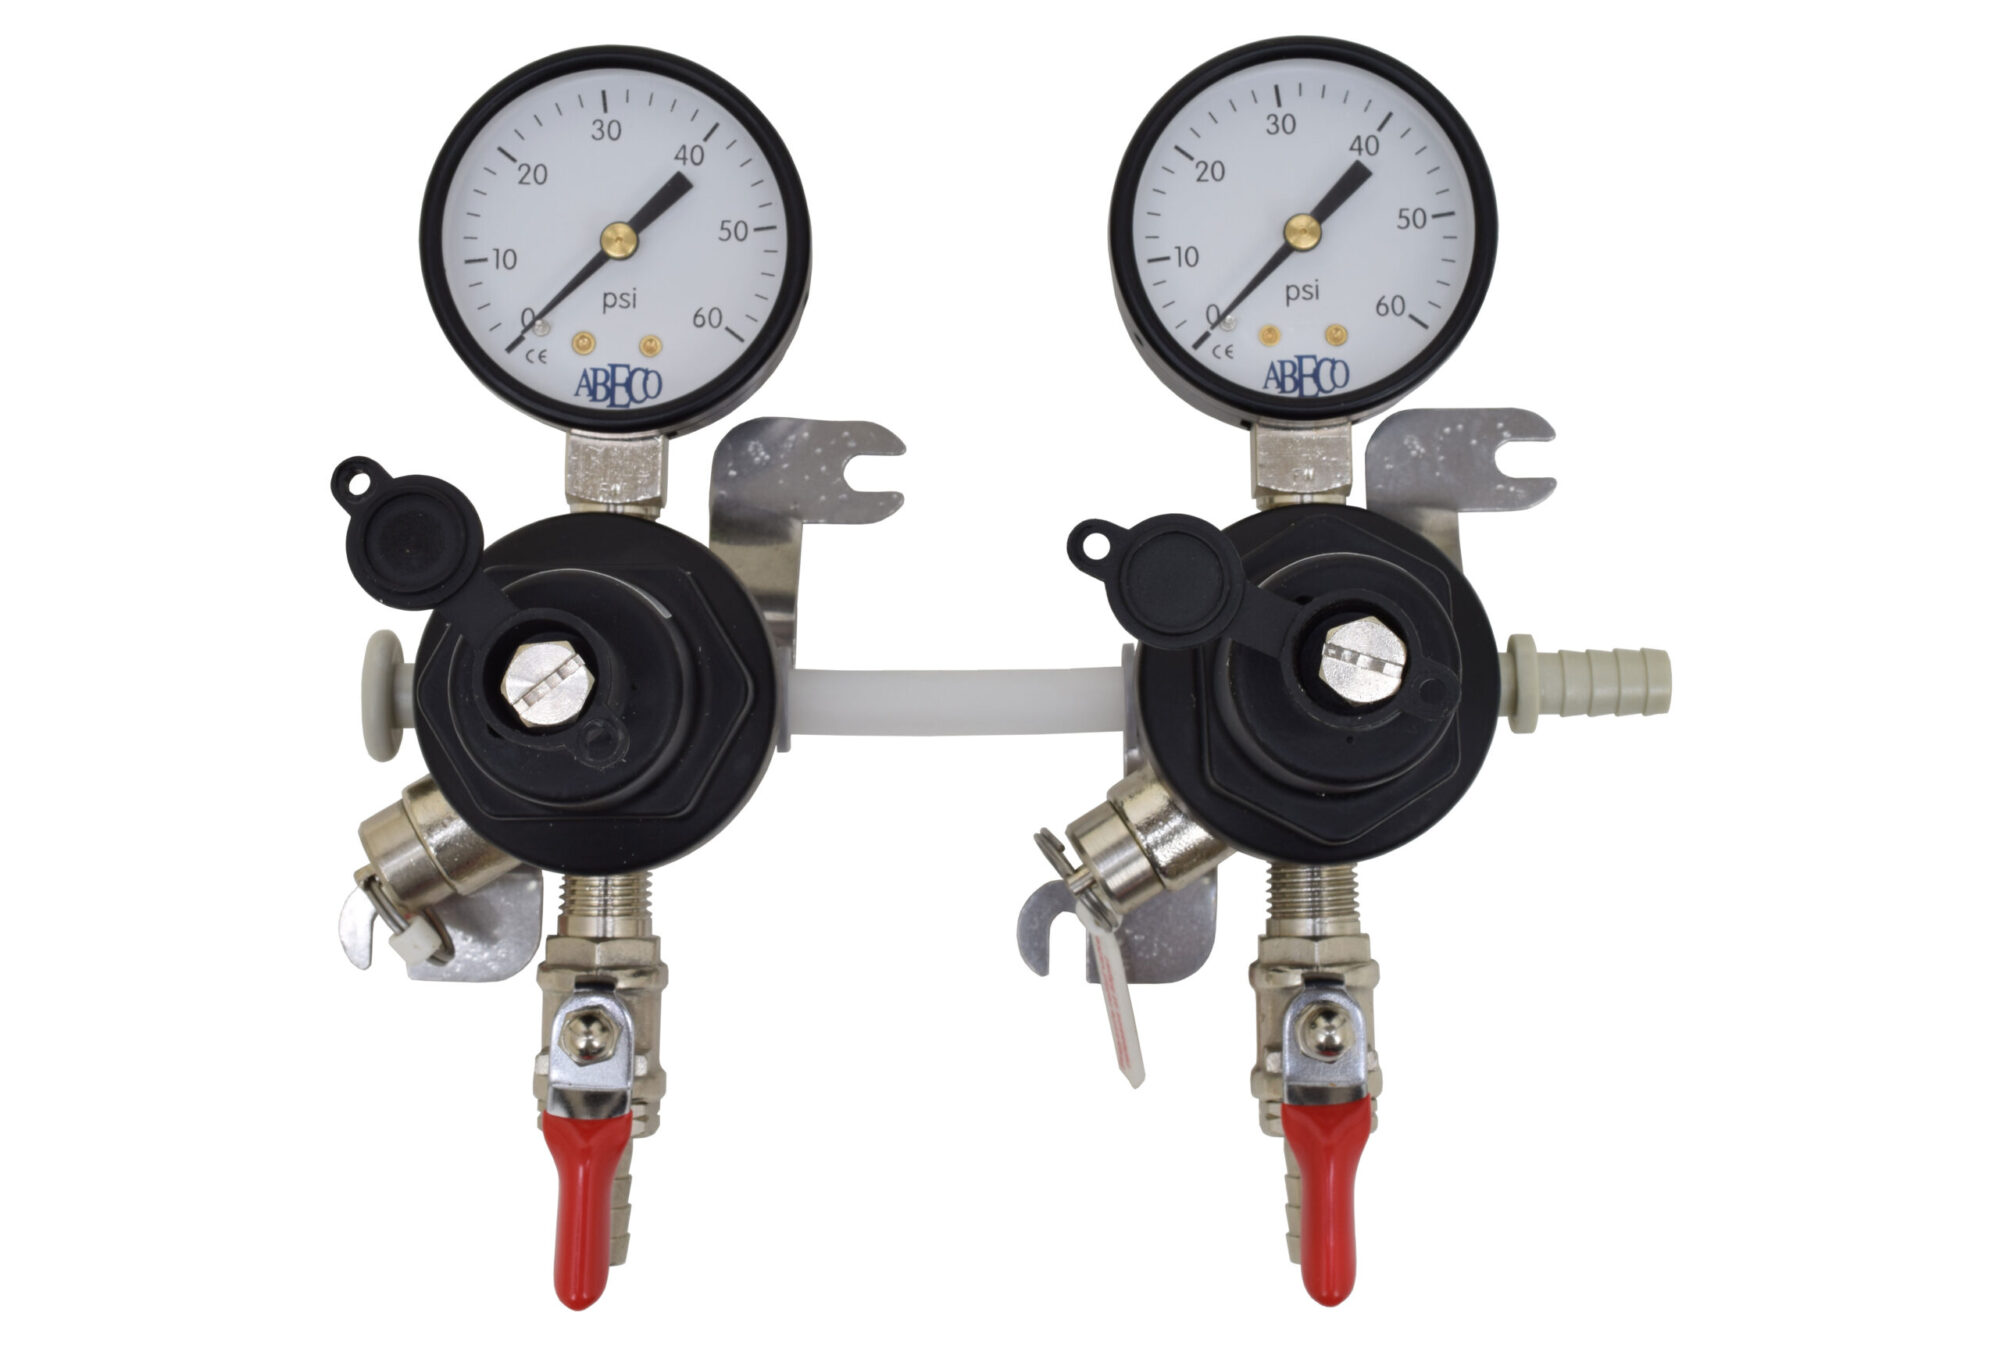 2702 Two TecFlo Secondary Regulator With Your Choice of Push In Fittings and 3/8" OD Poly Union